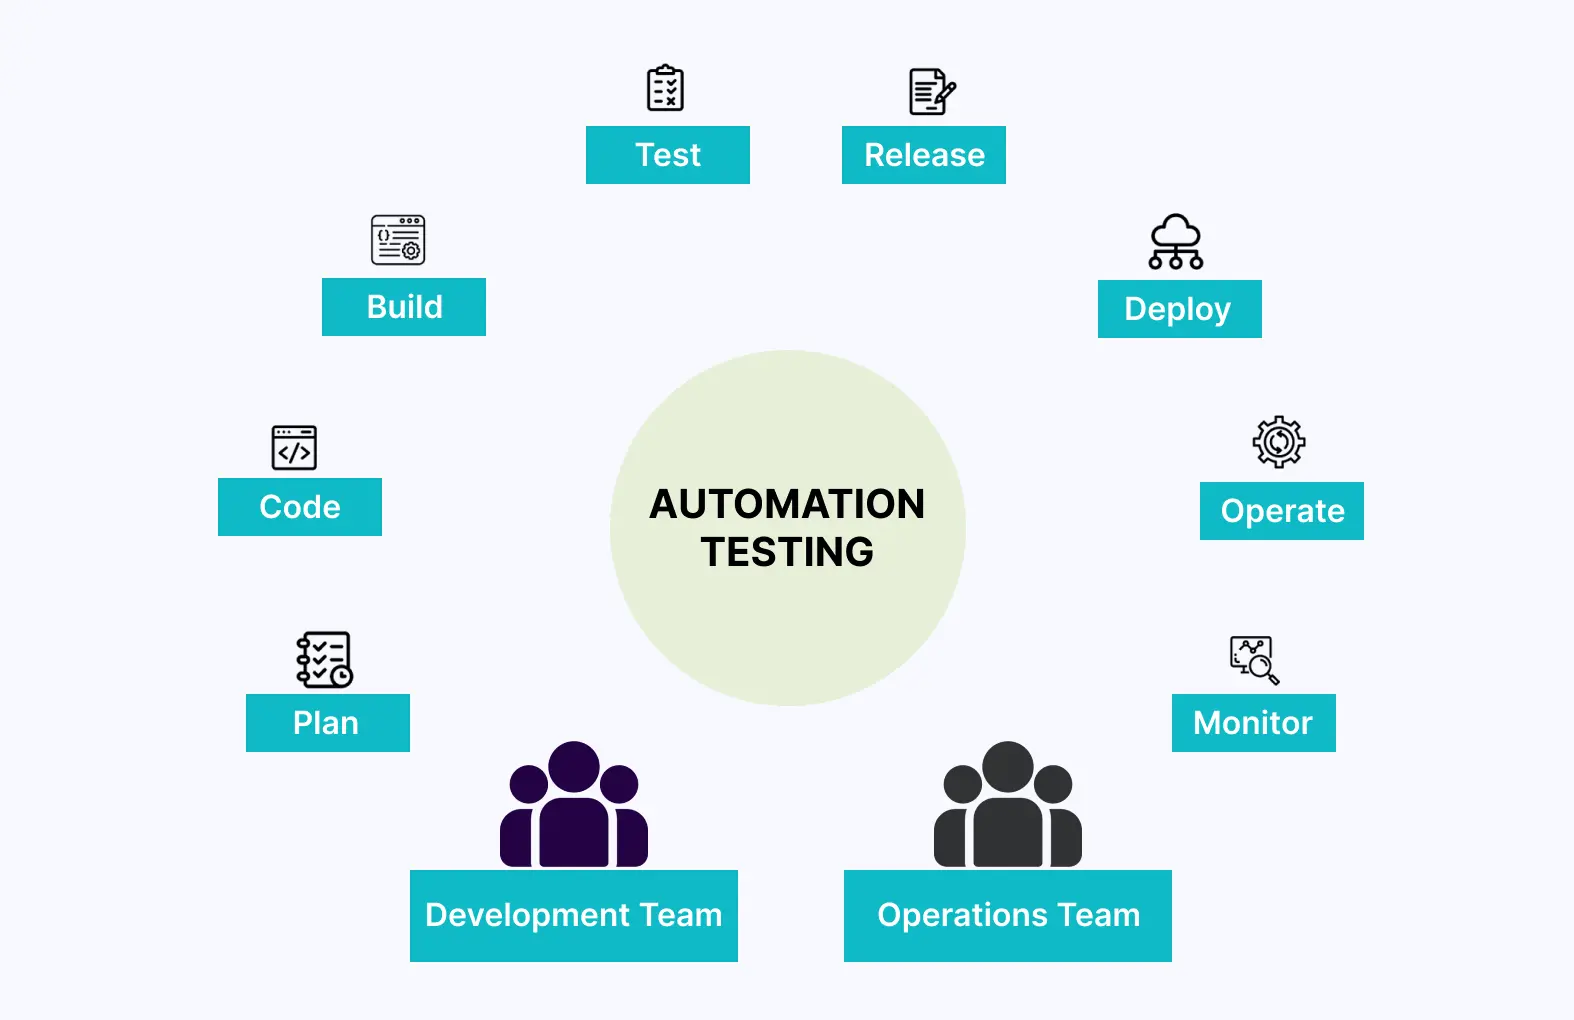 benefits-of-automation-testing